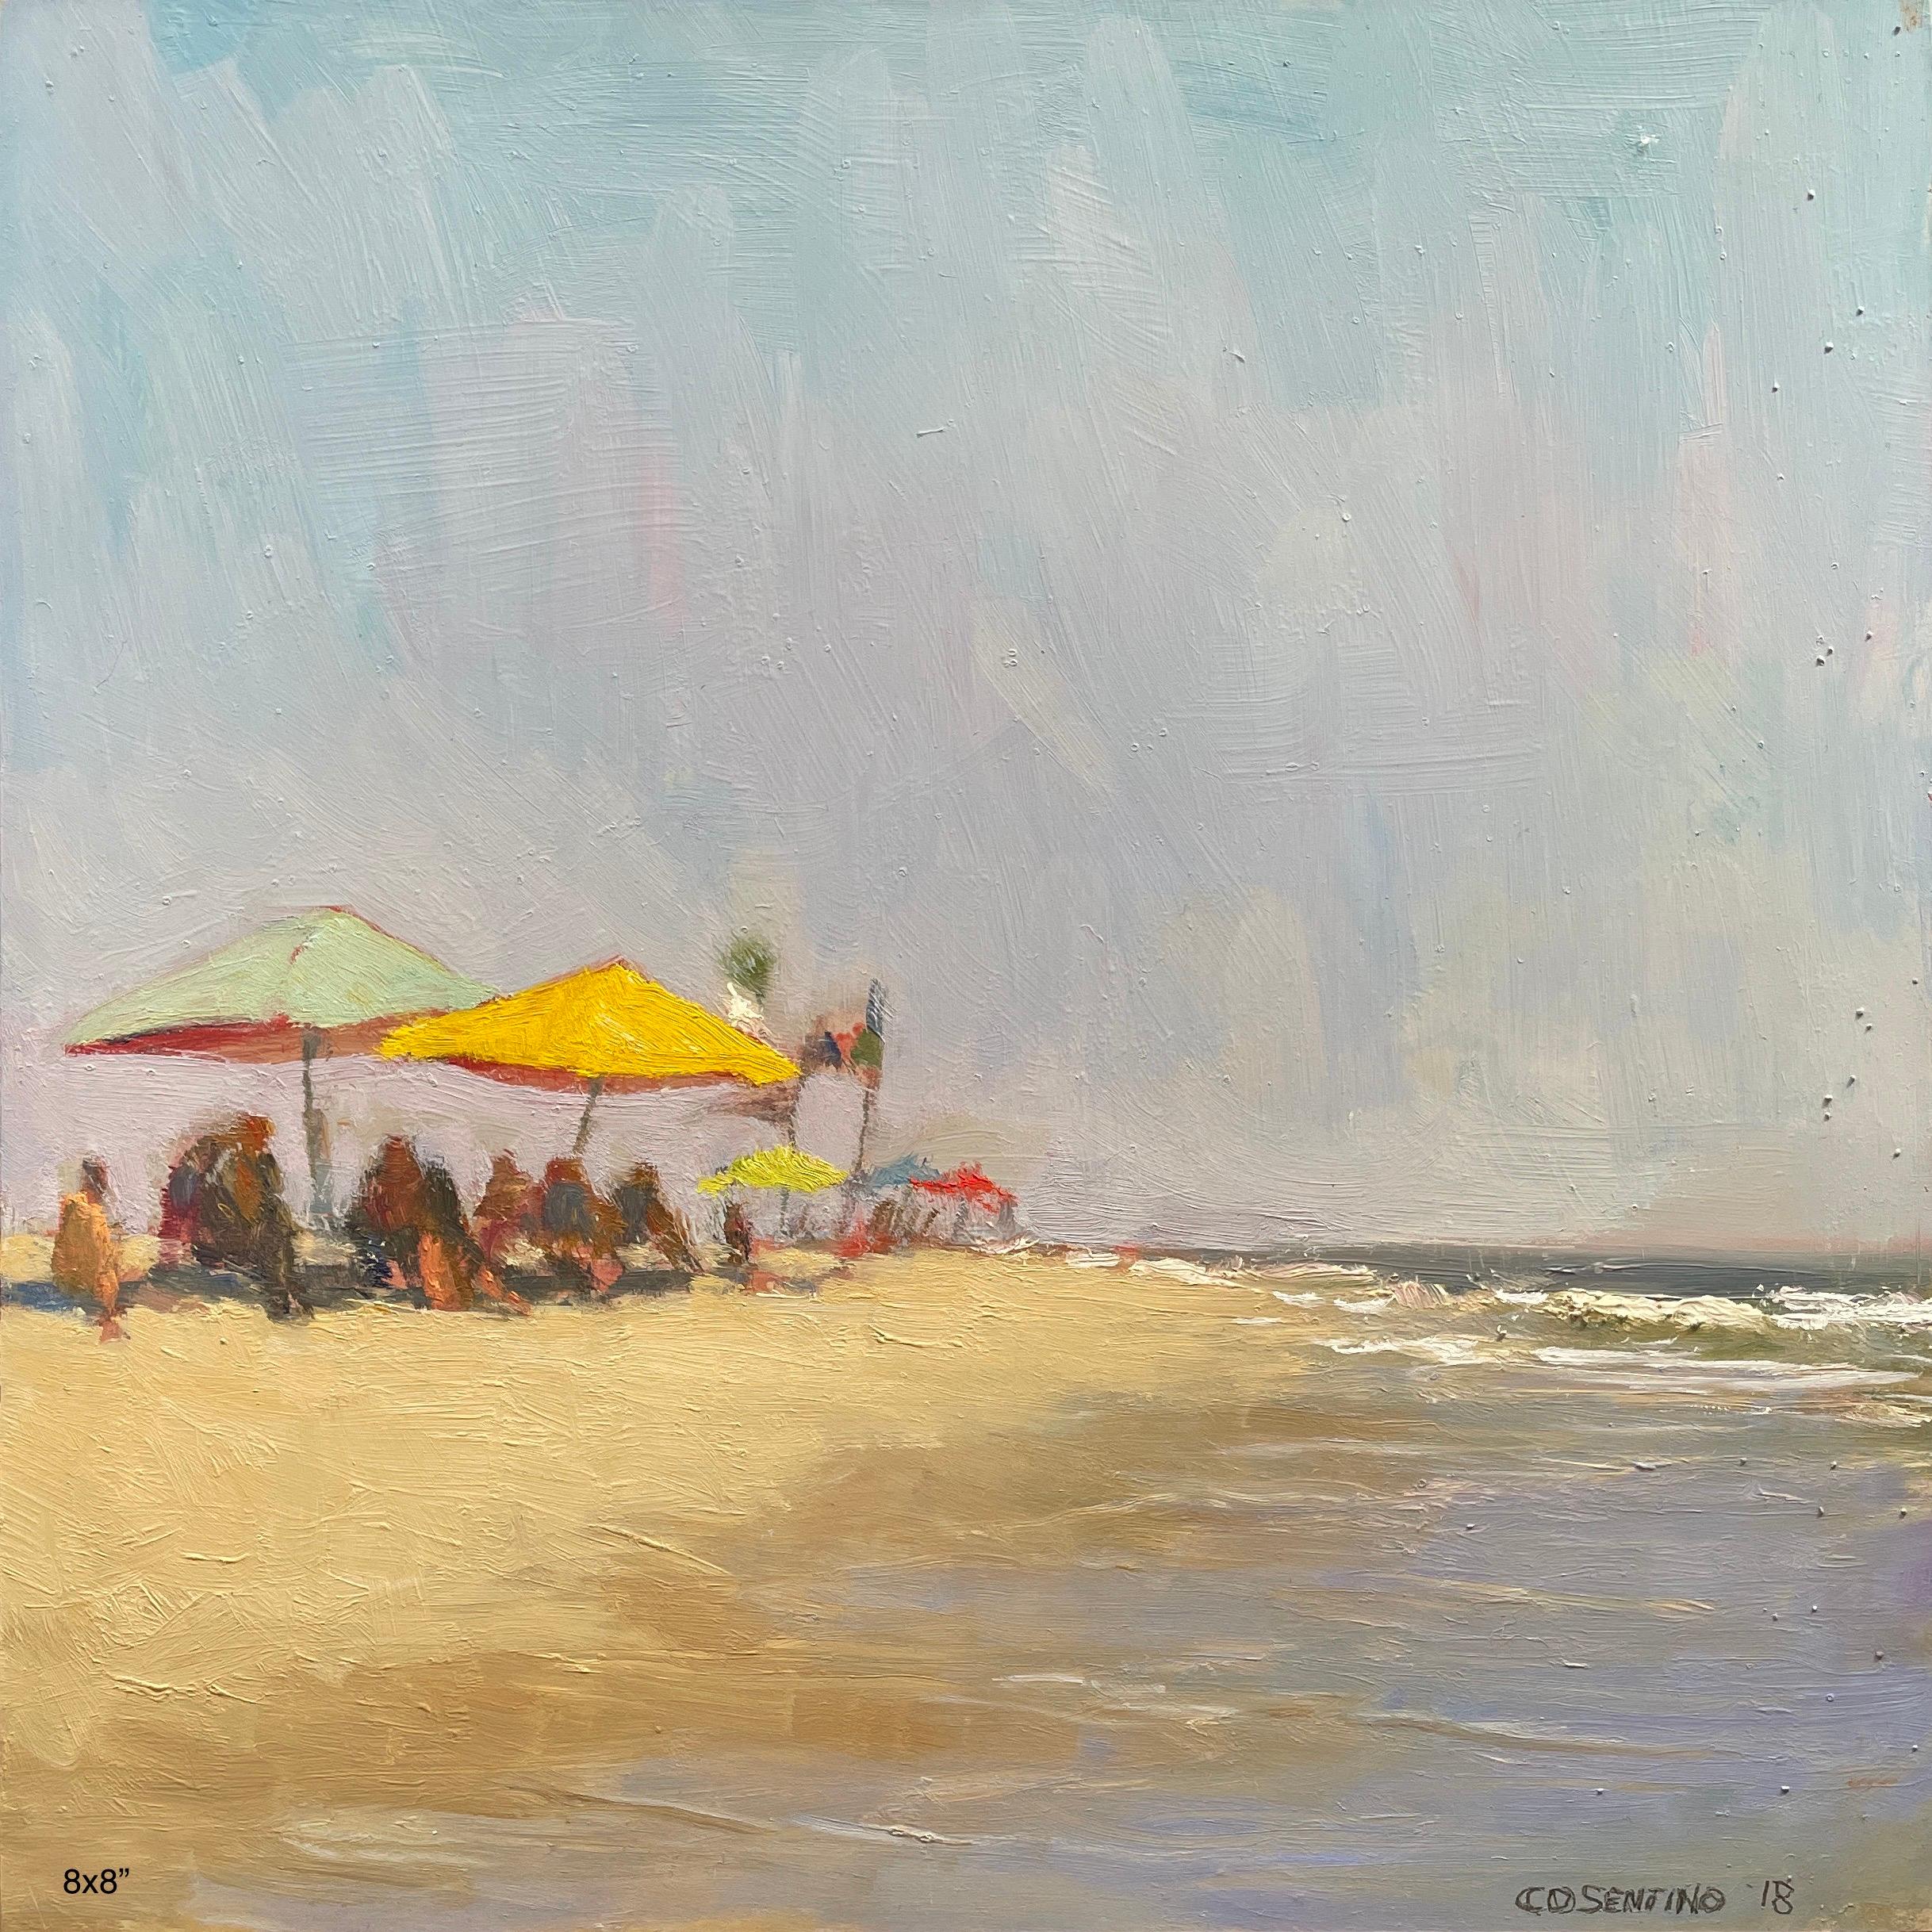 Steve Cohen Landscape Painting - Beach Series (Green and Yellow Umbrella)